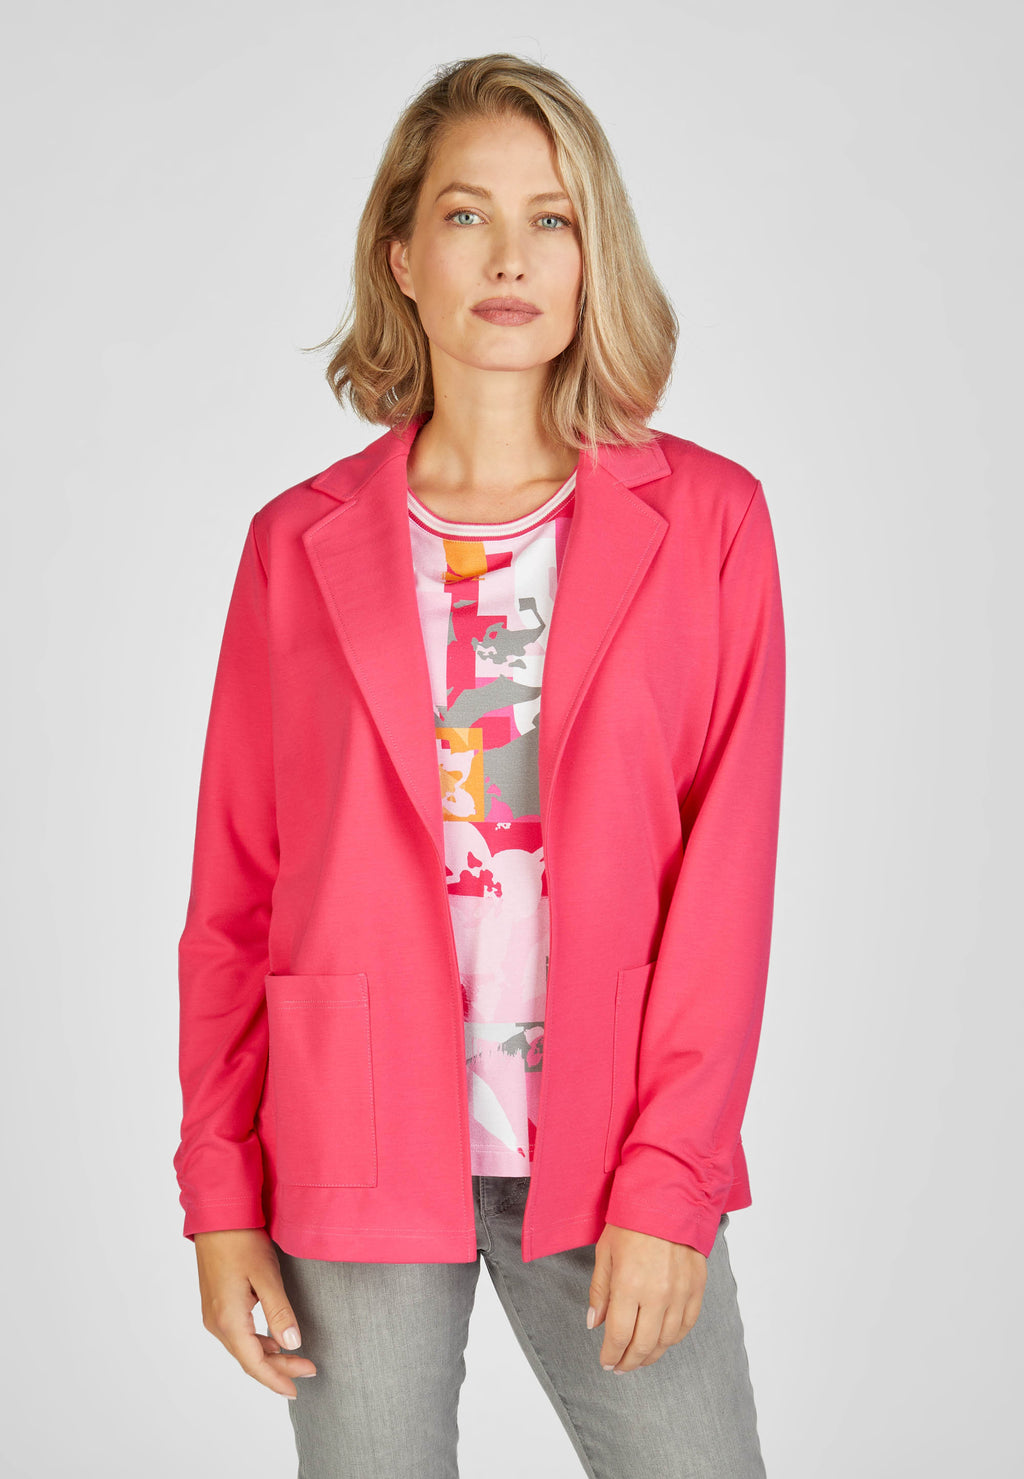 Rabe magnolia Park edge to edge blazer in pink with ruched details on sleeves product code 52-113220